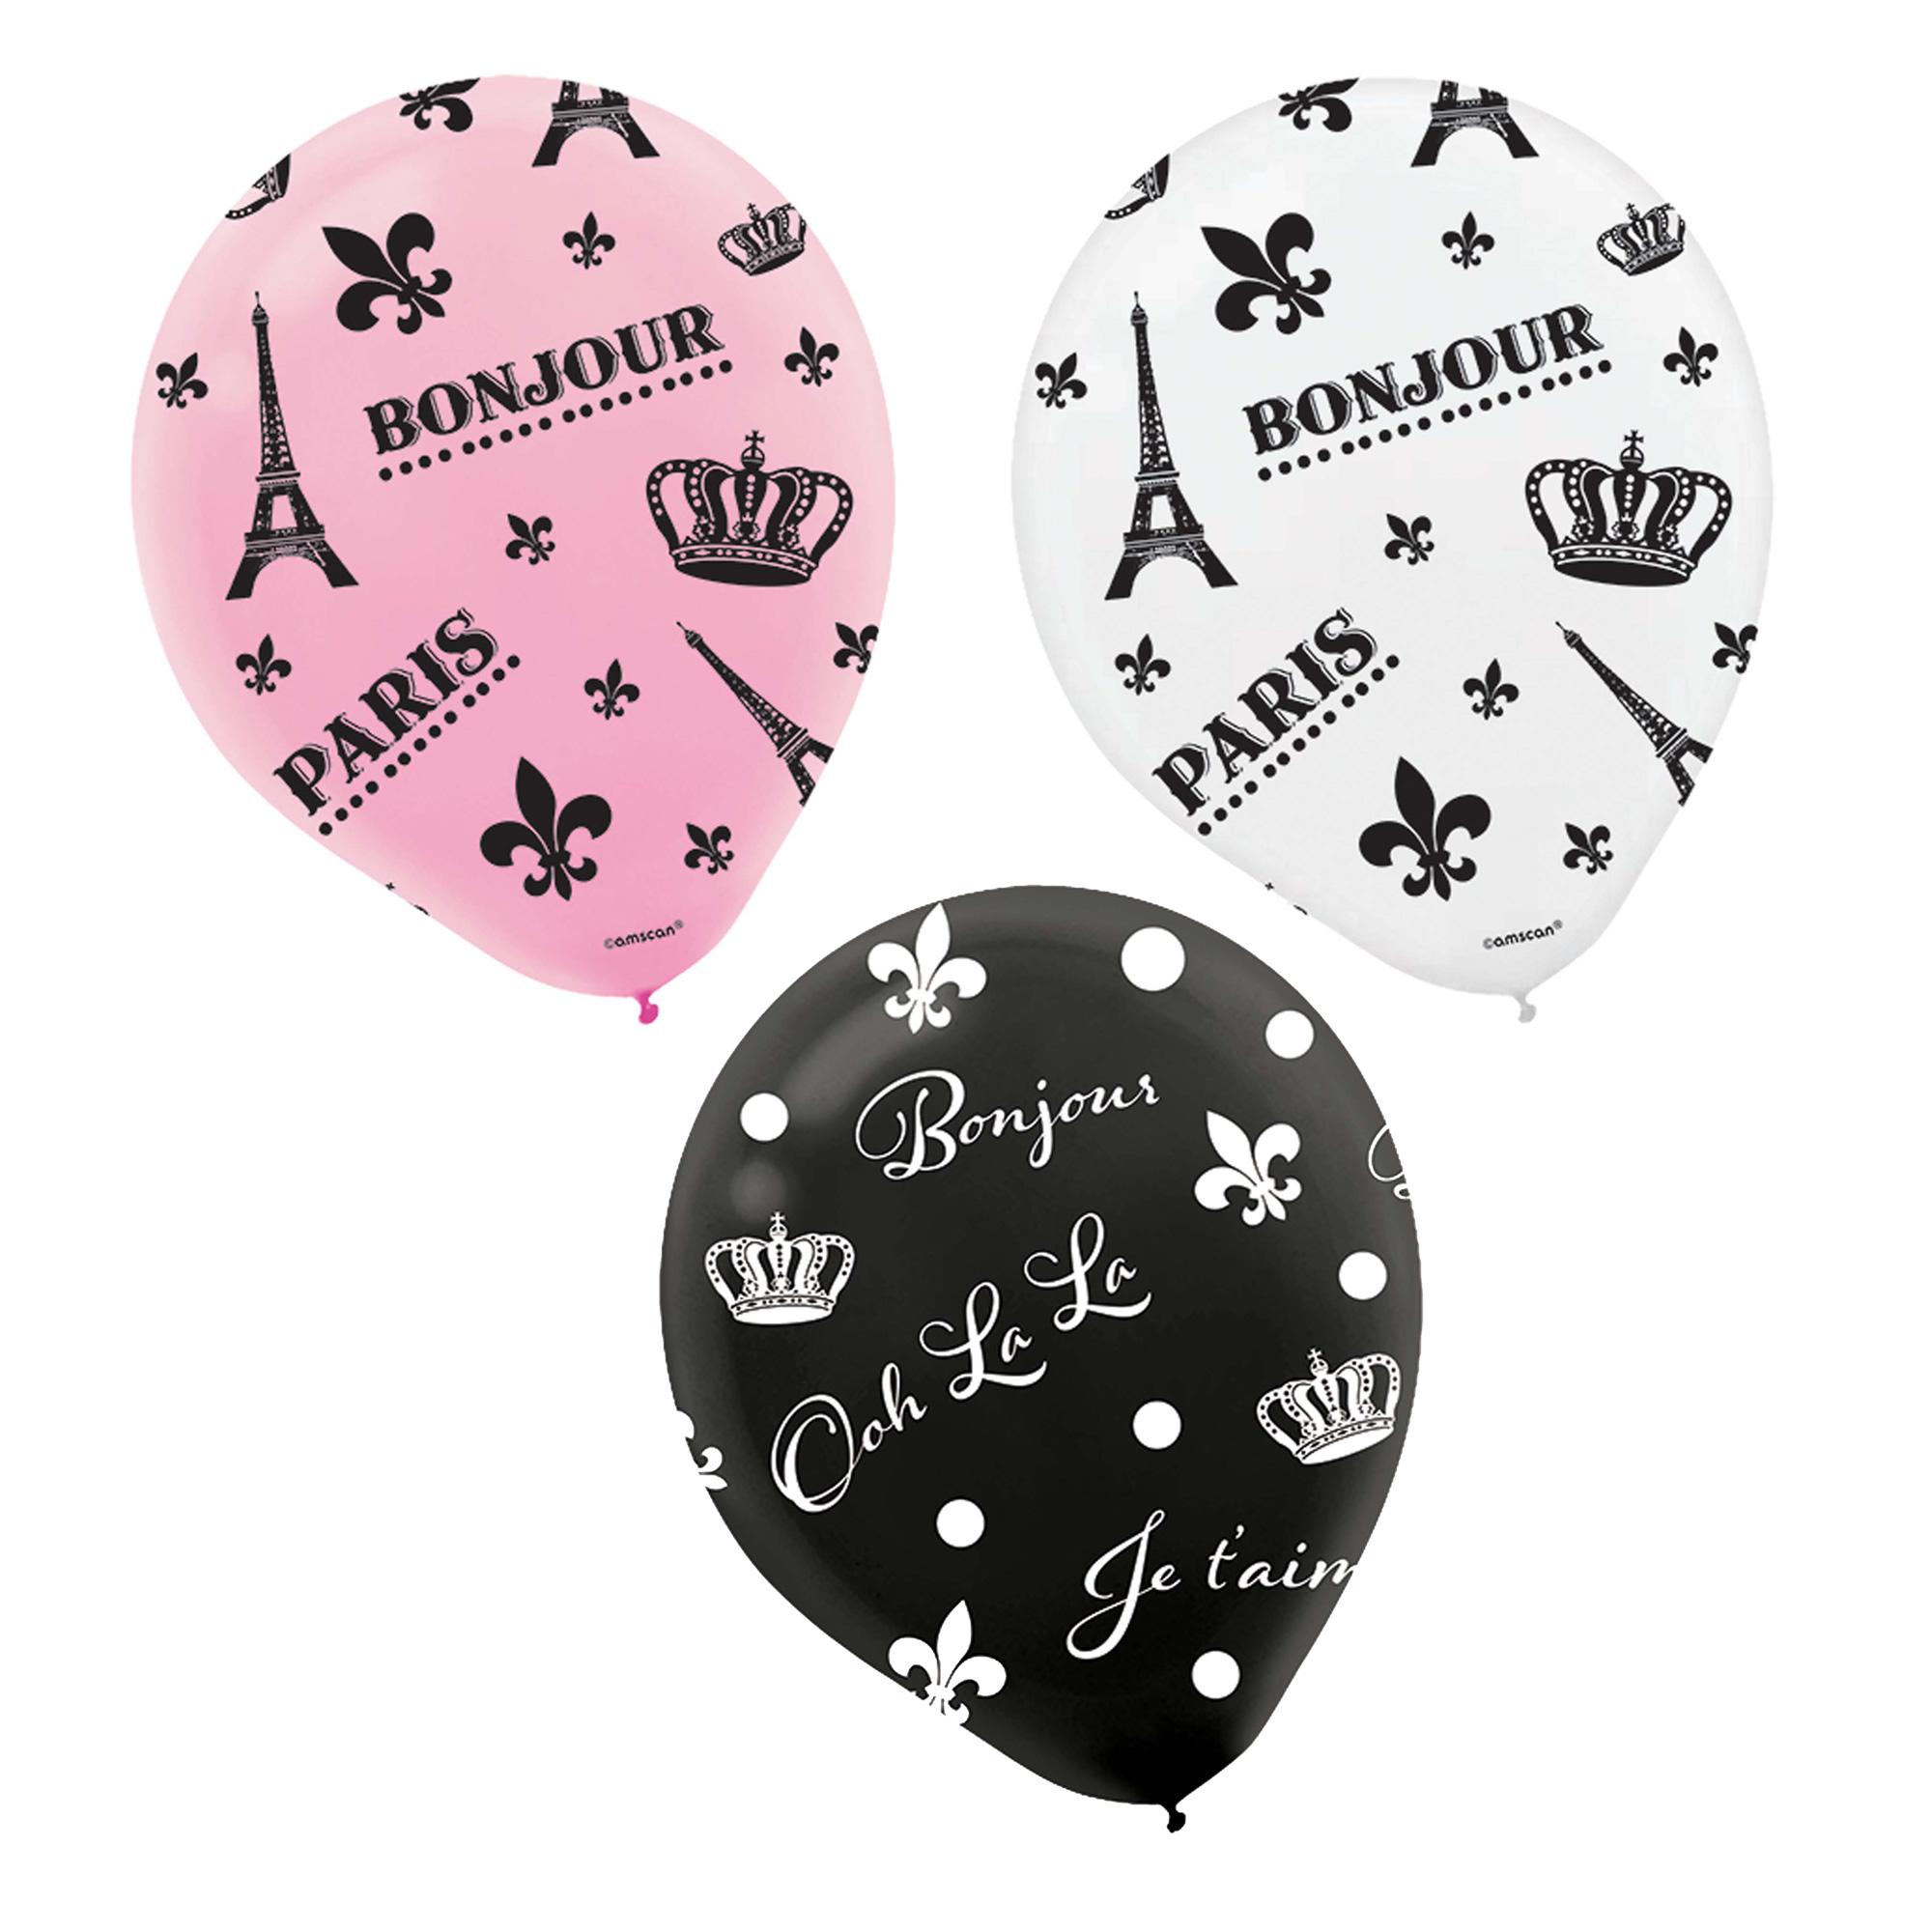 A Day In Paris Printed Latex Balloons 6pcs Balloons & Streamers - Party Centre - Party Centre